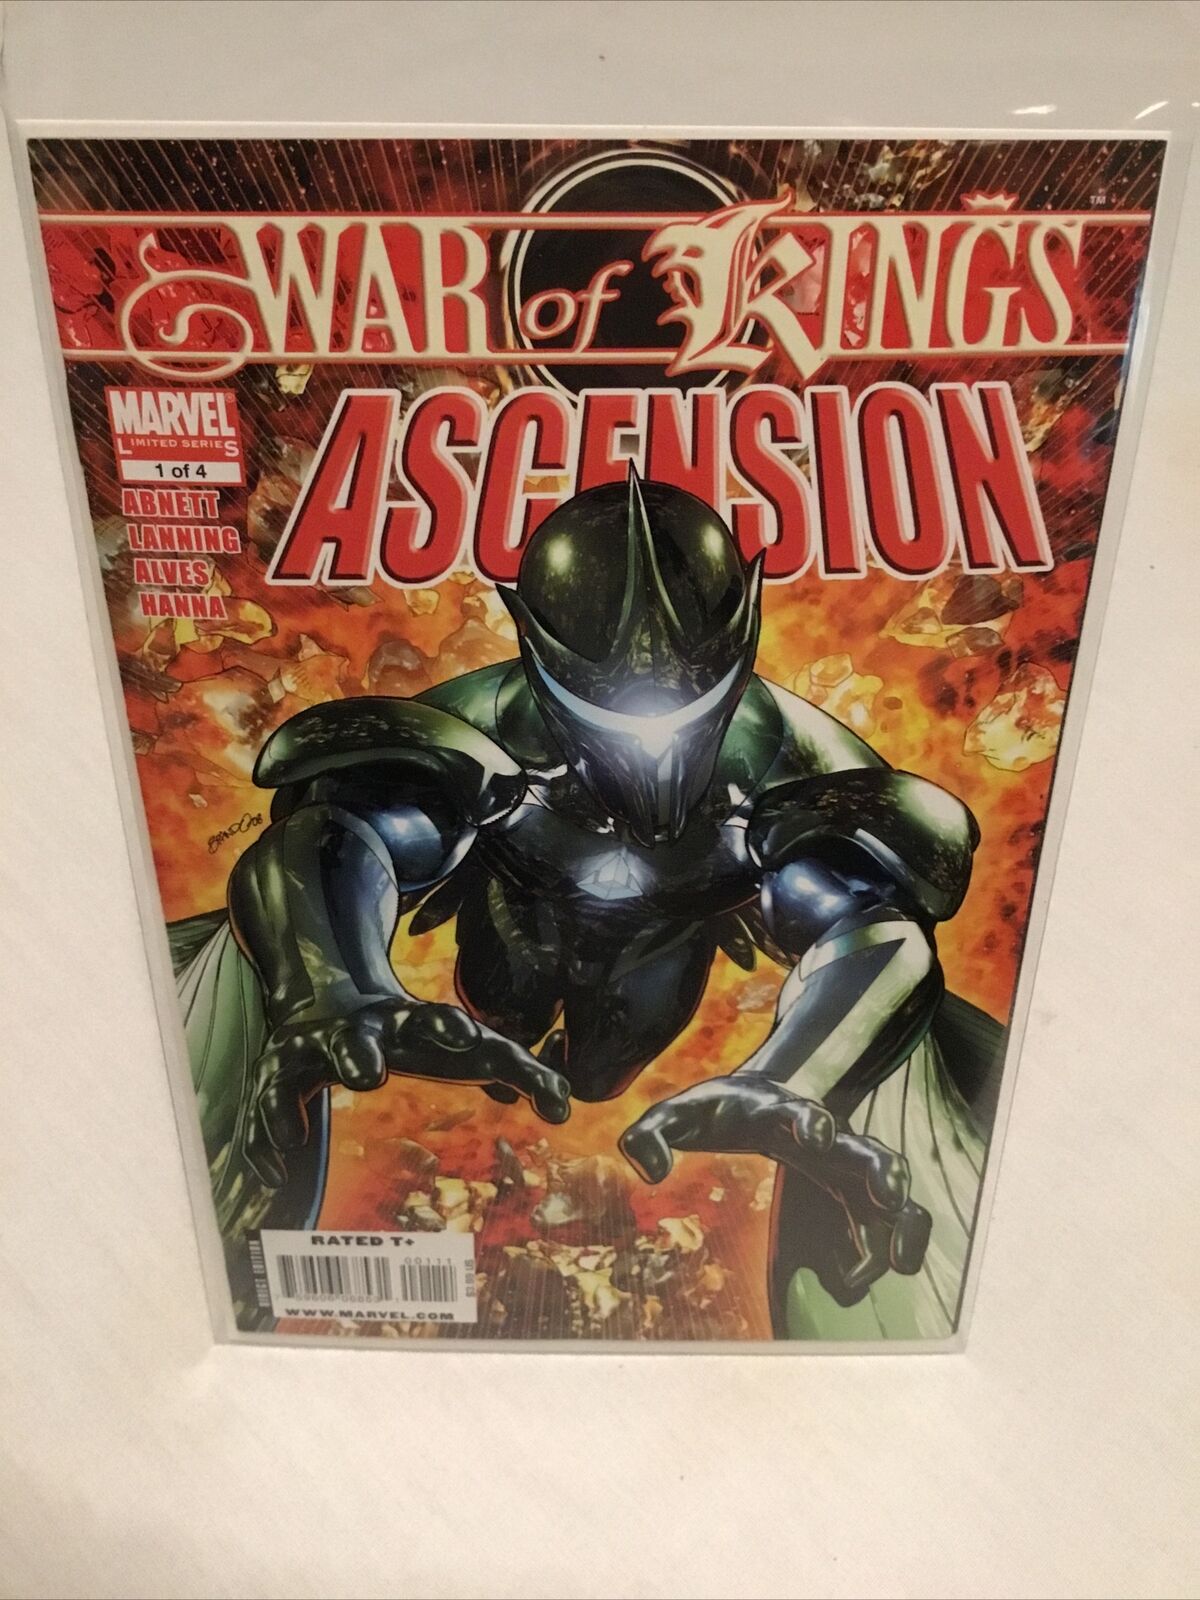 💎RARE 💎MARVEL-War Of Kings Asension #1!!Great Buy🔥 Excellent Collector Item🔥